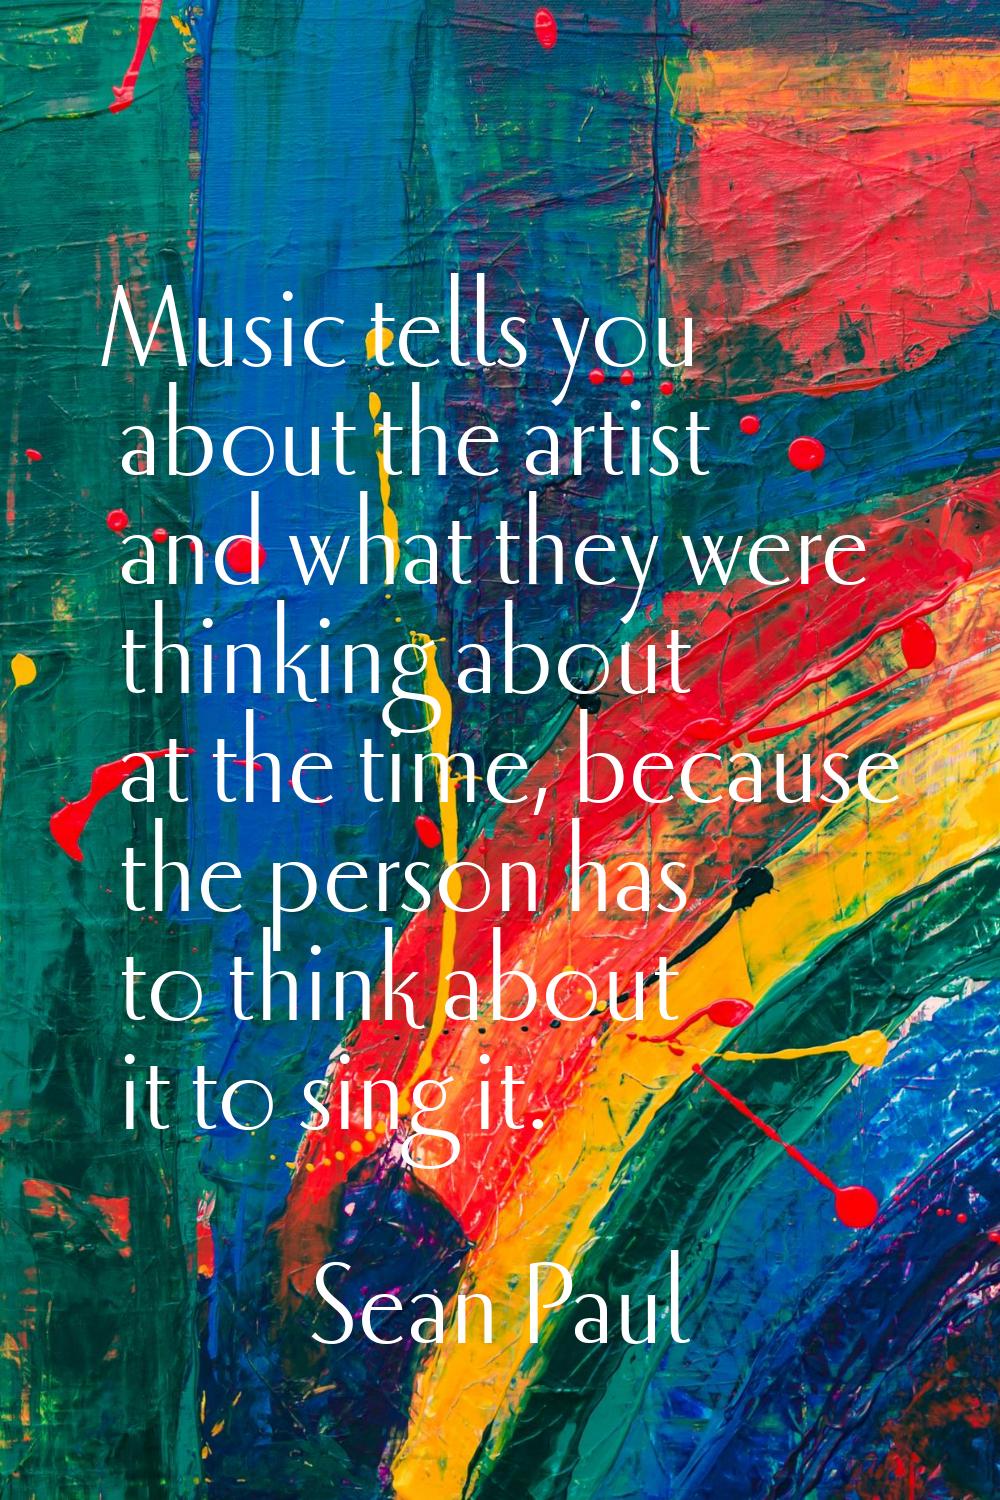 Music tells you about the artist and what they were thinking about at the time, because the person 